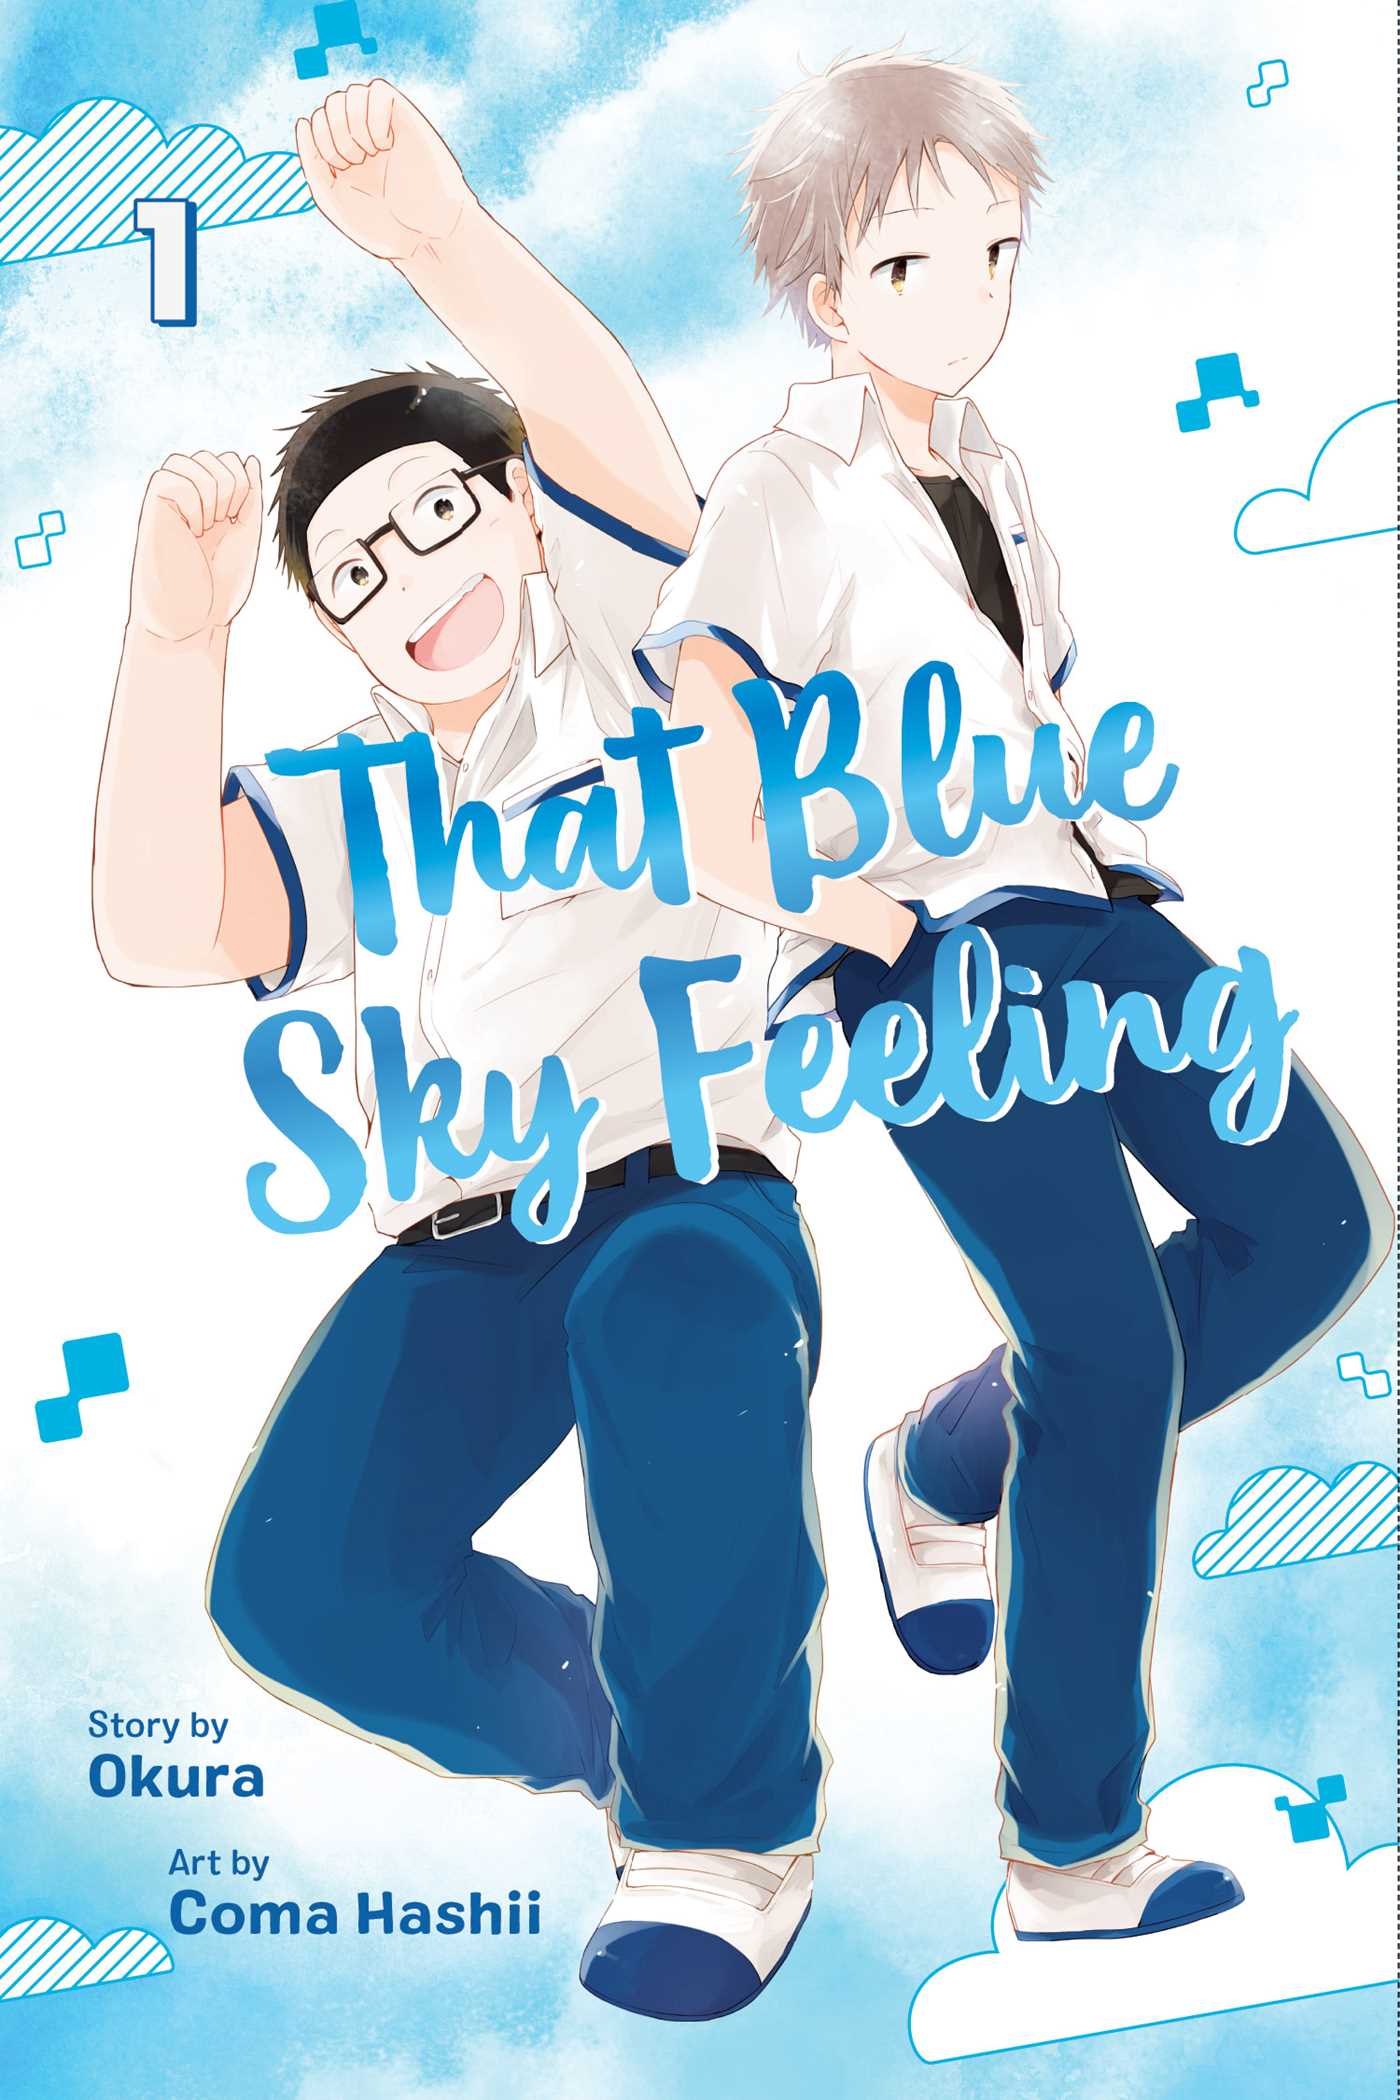 That Blue Sky Feeling Vol. 1 Review